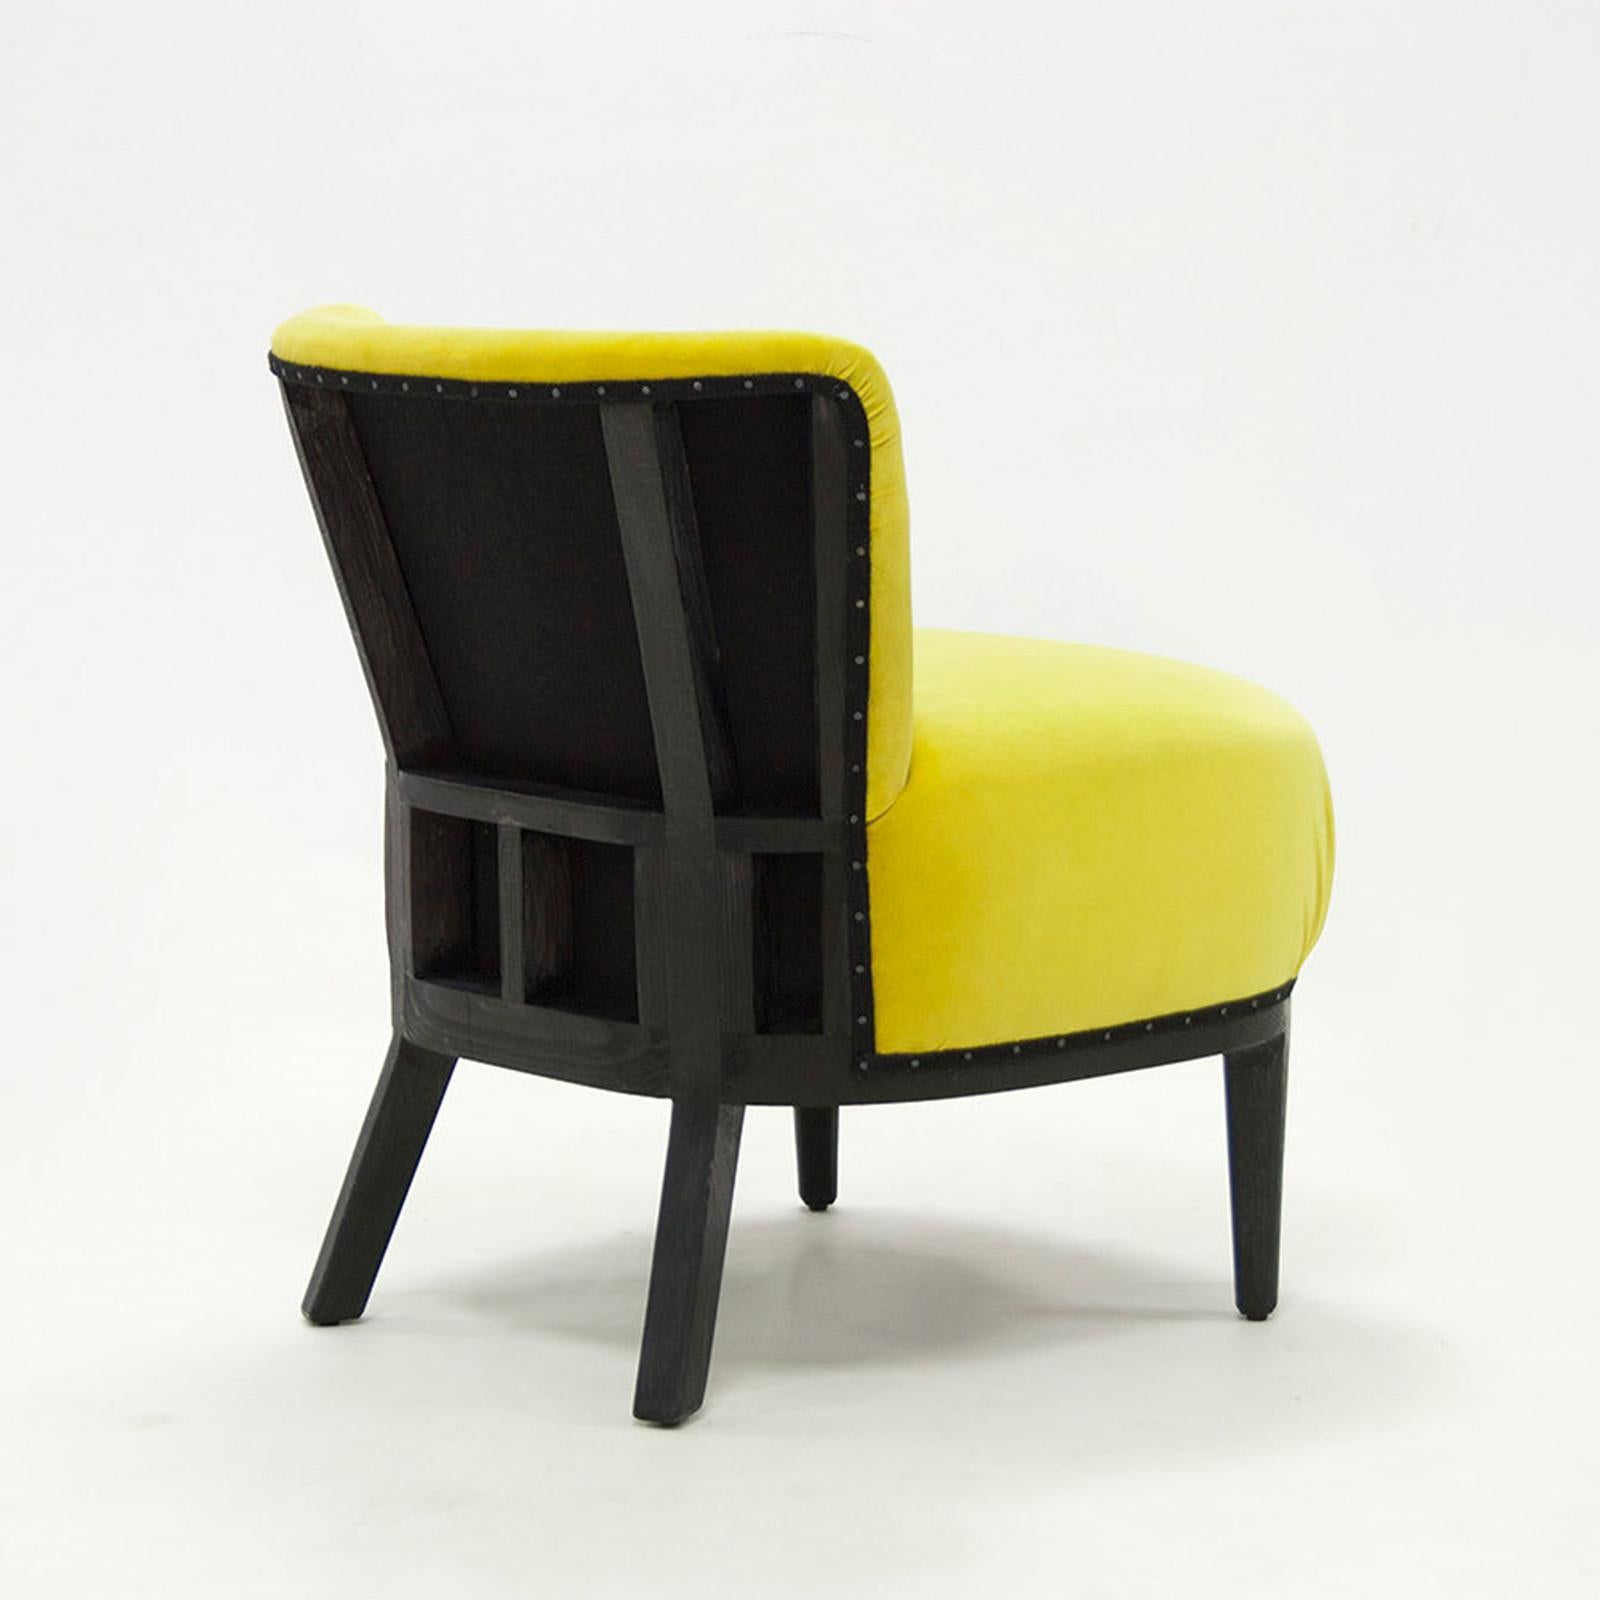 Chair yellow black with structure in solid
blackened tinted wood. Upholstered and
covered with yellow velvet high quality fabric.
Also available with other fabric colors on request.